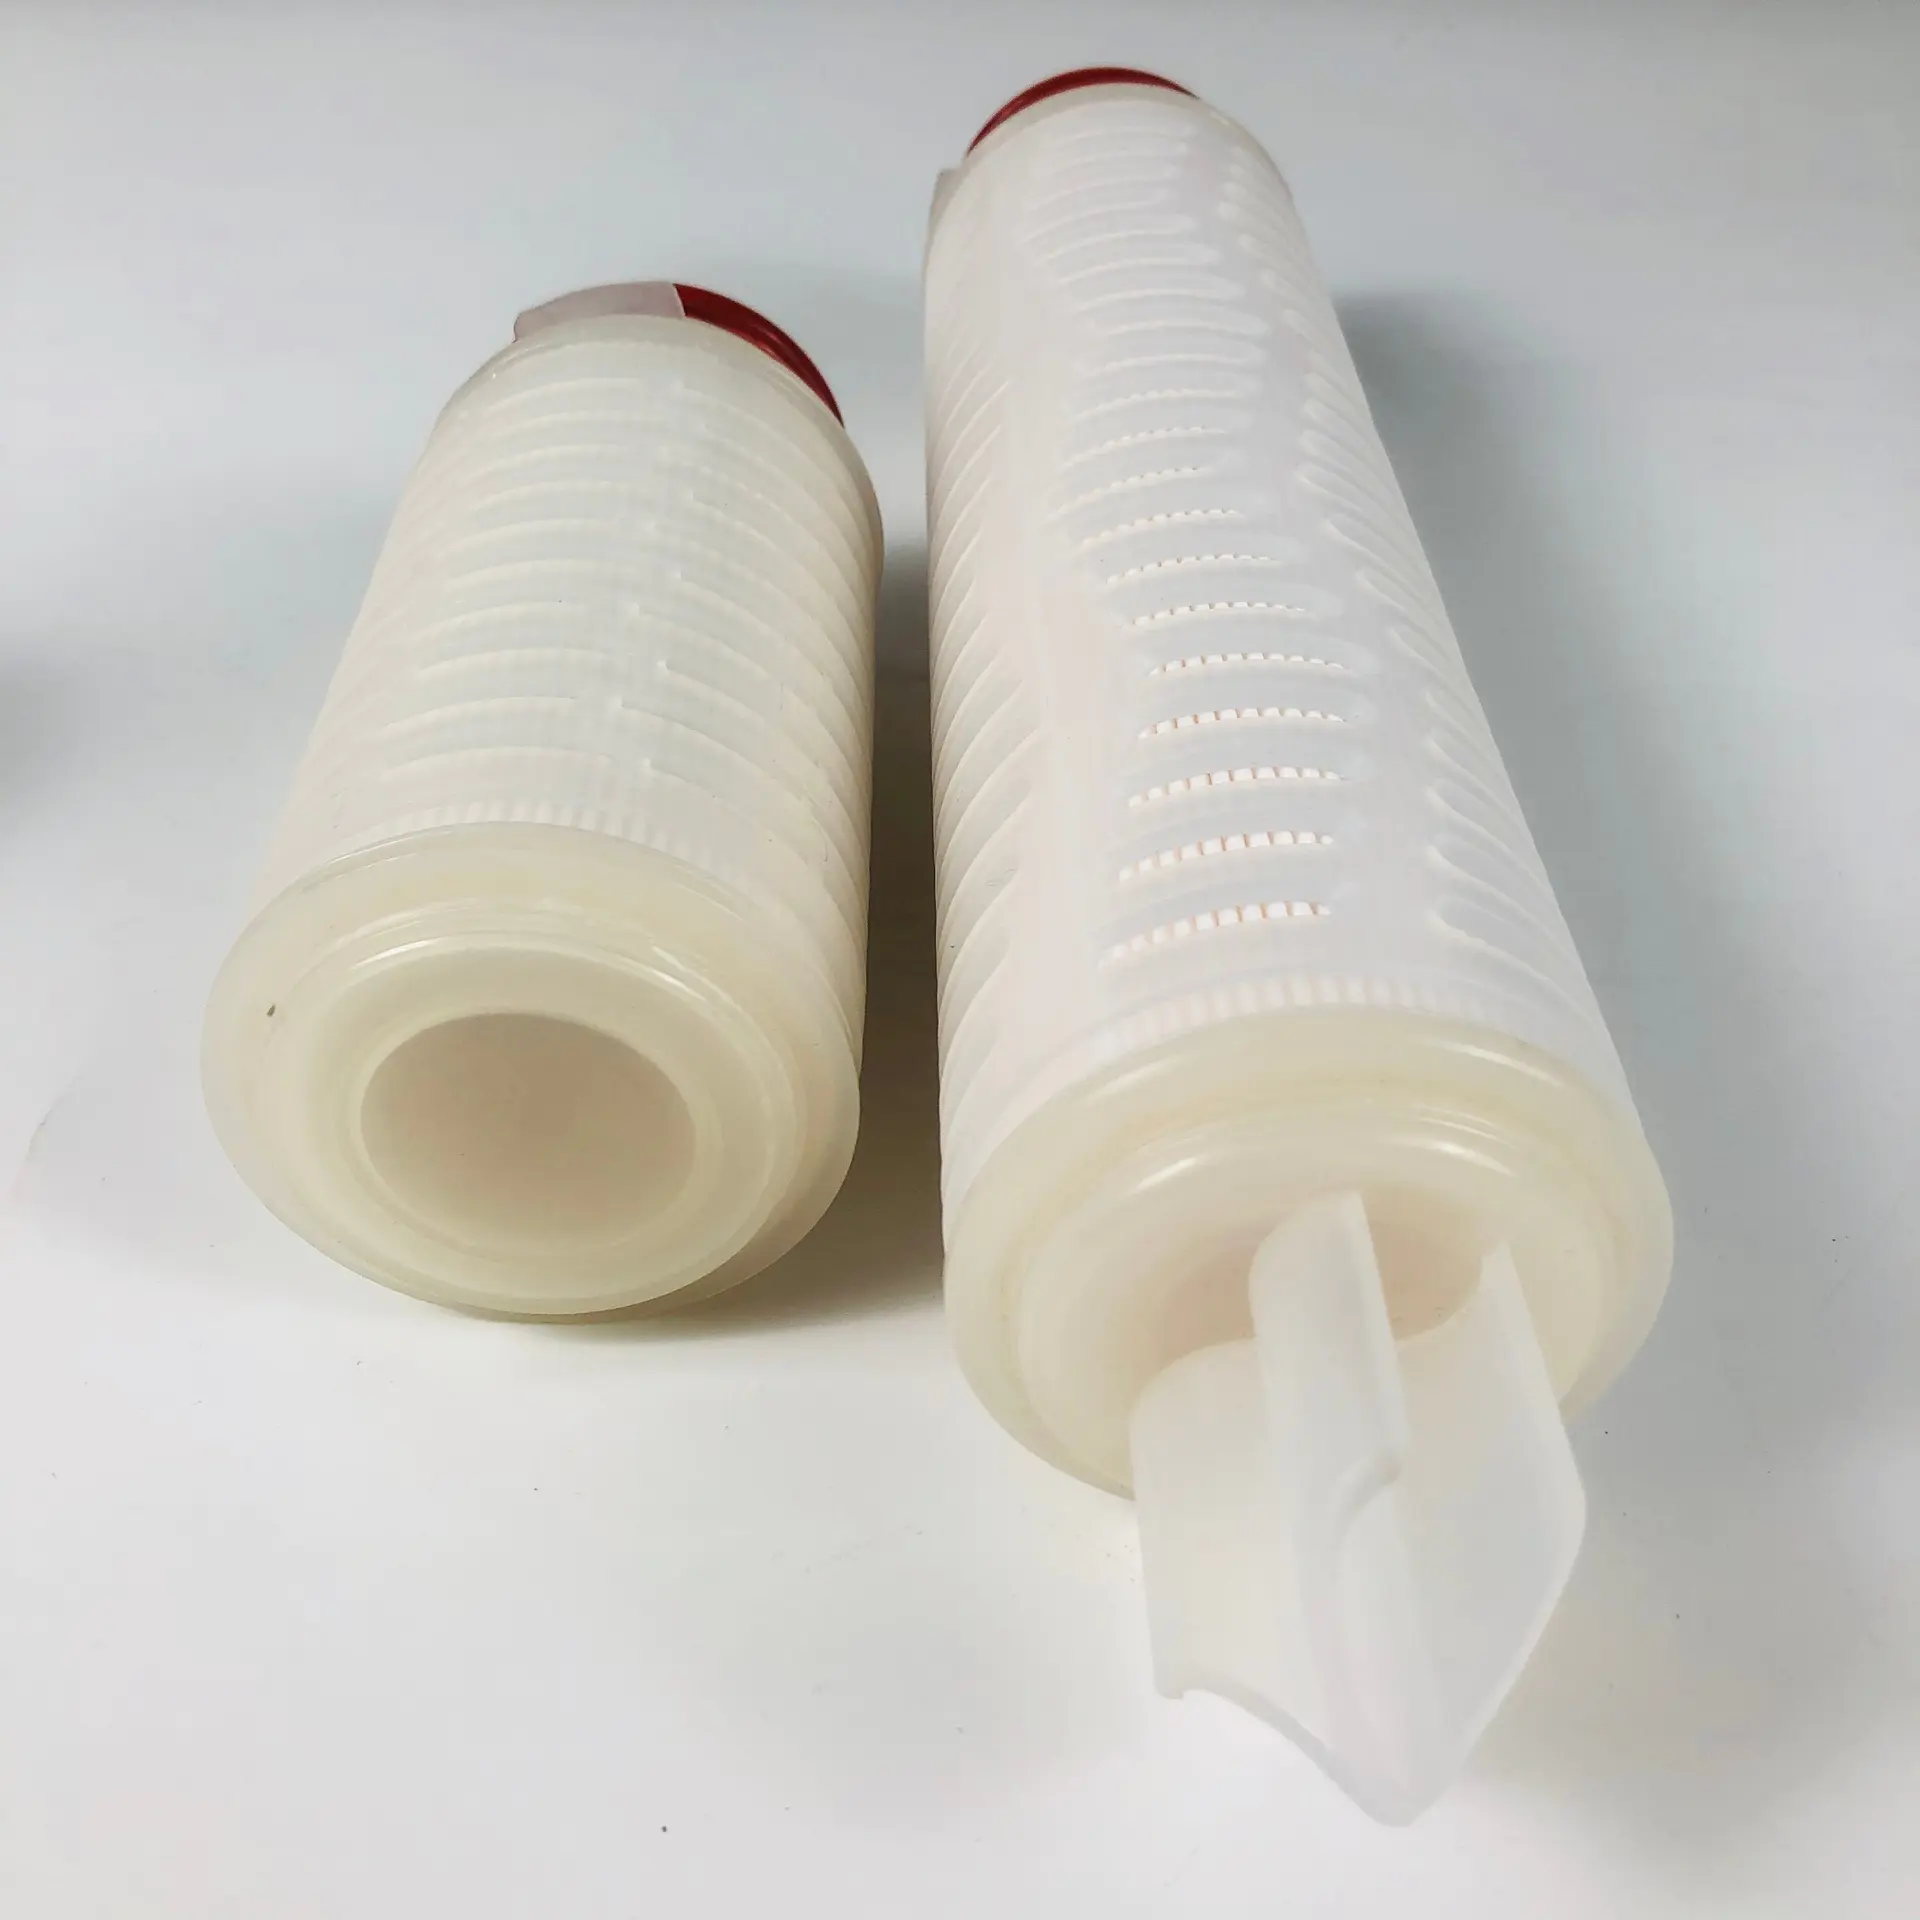 Factory supply dust filter cartridge for Whole house water filters Replacement